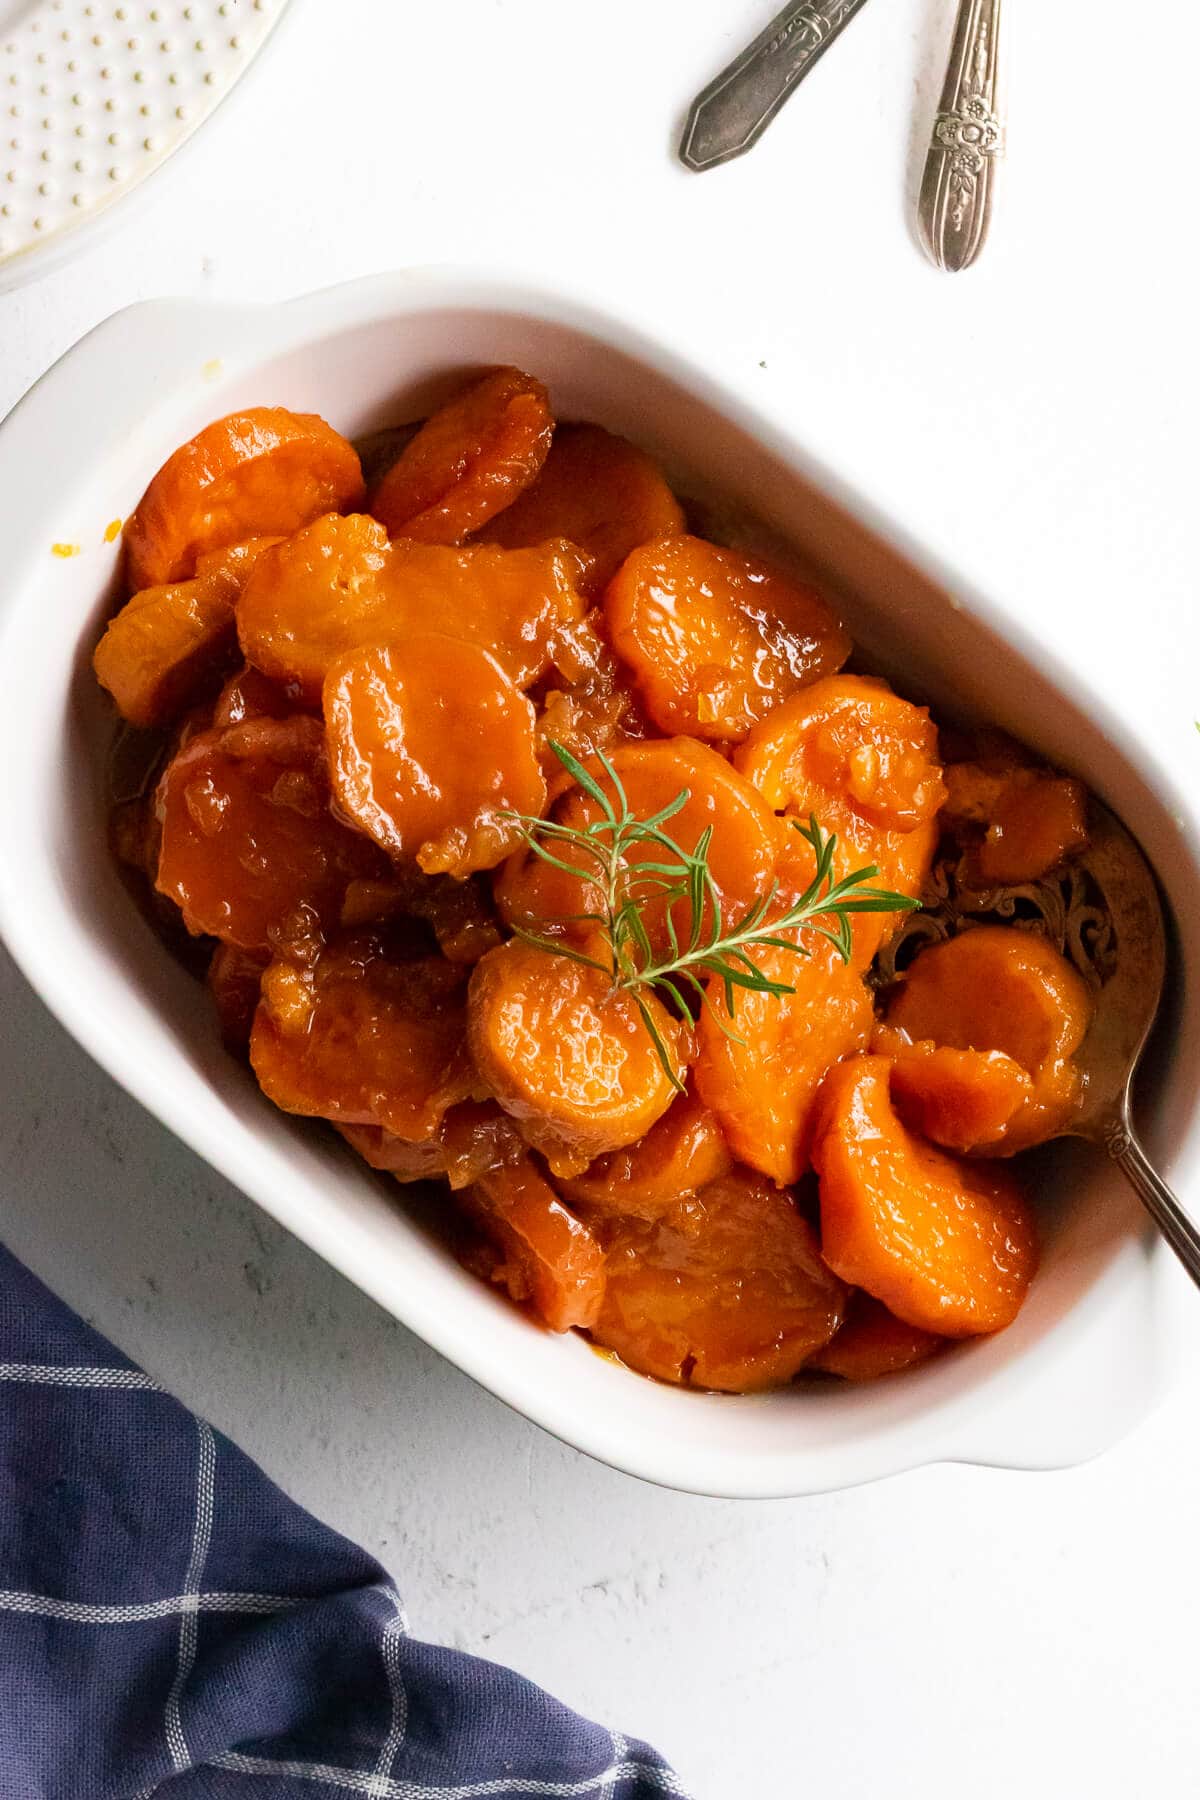 Candied sweet potatoes in a white serving dish.